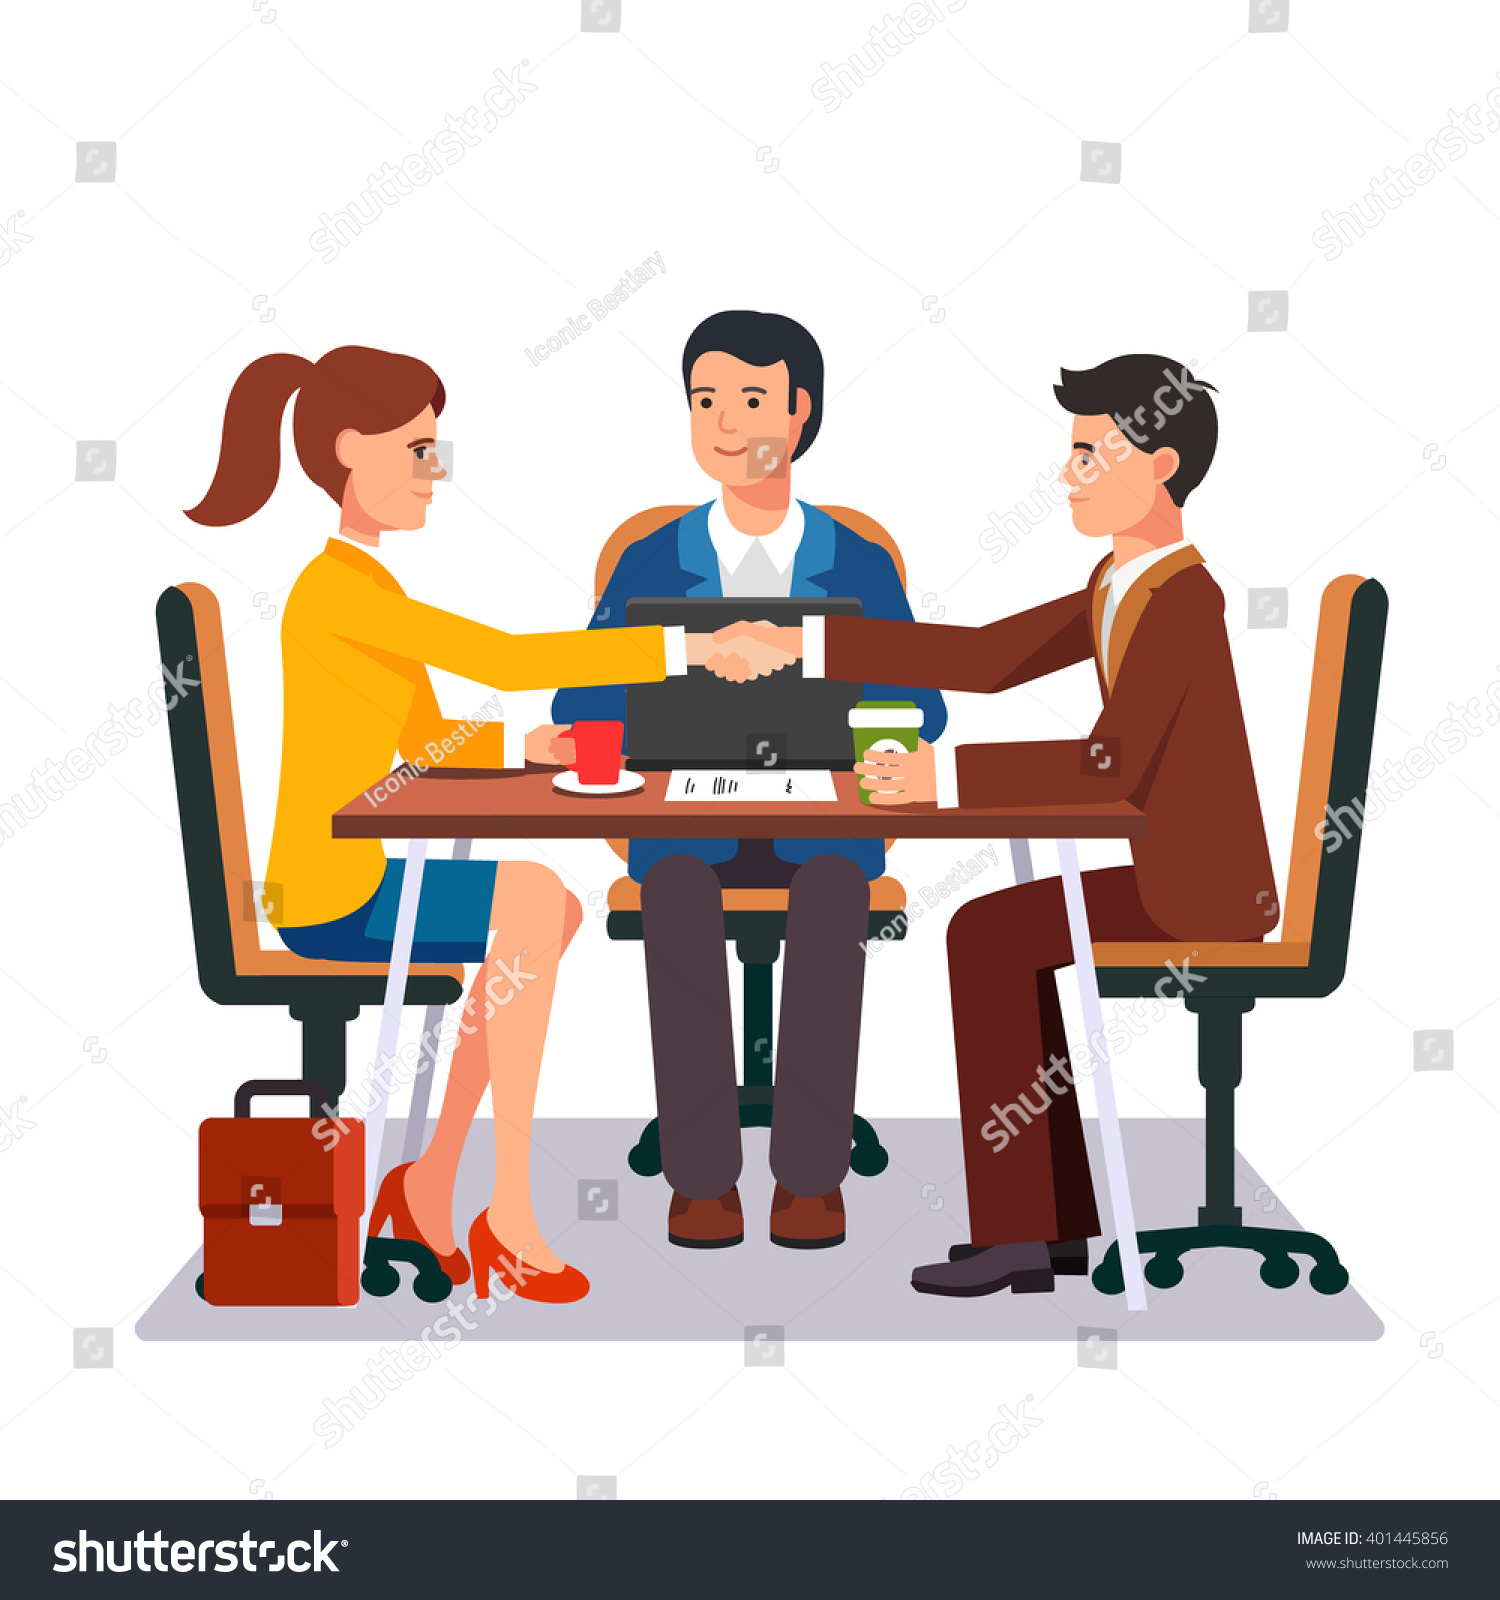 business deal clipart - photo #44